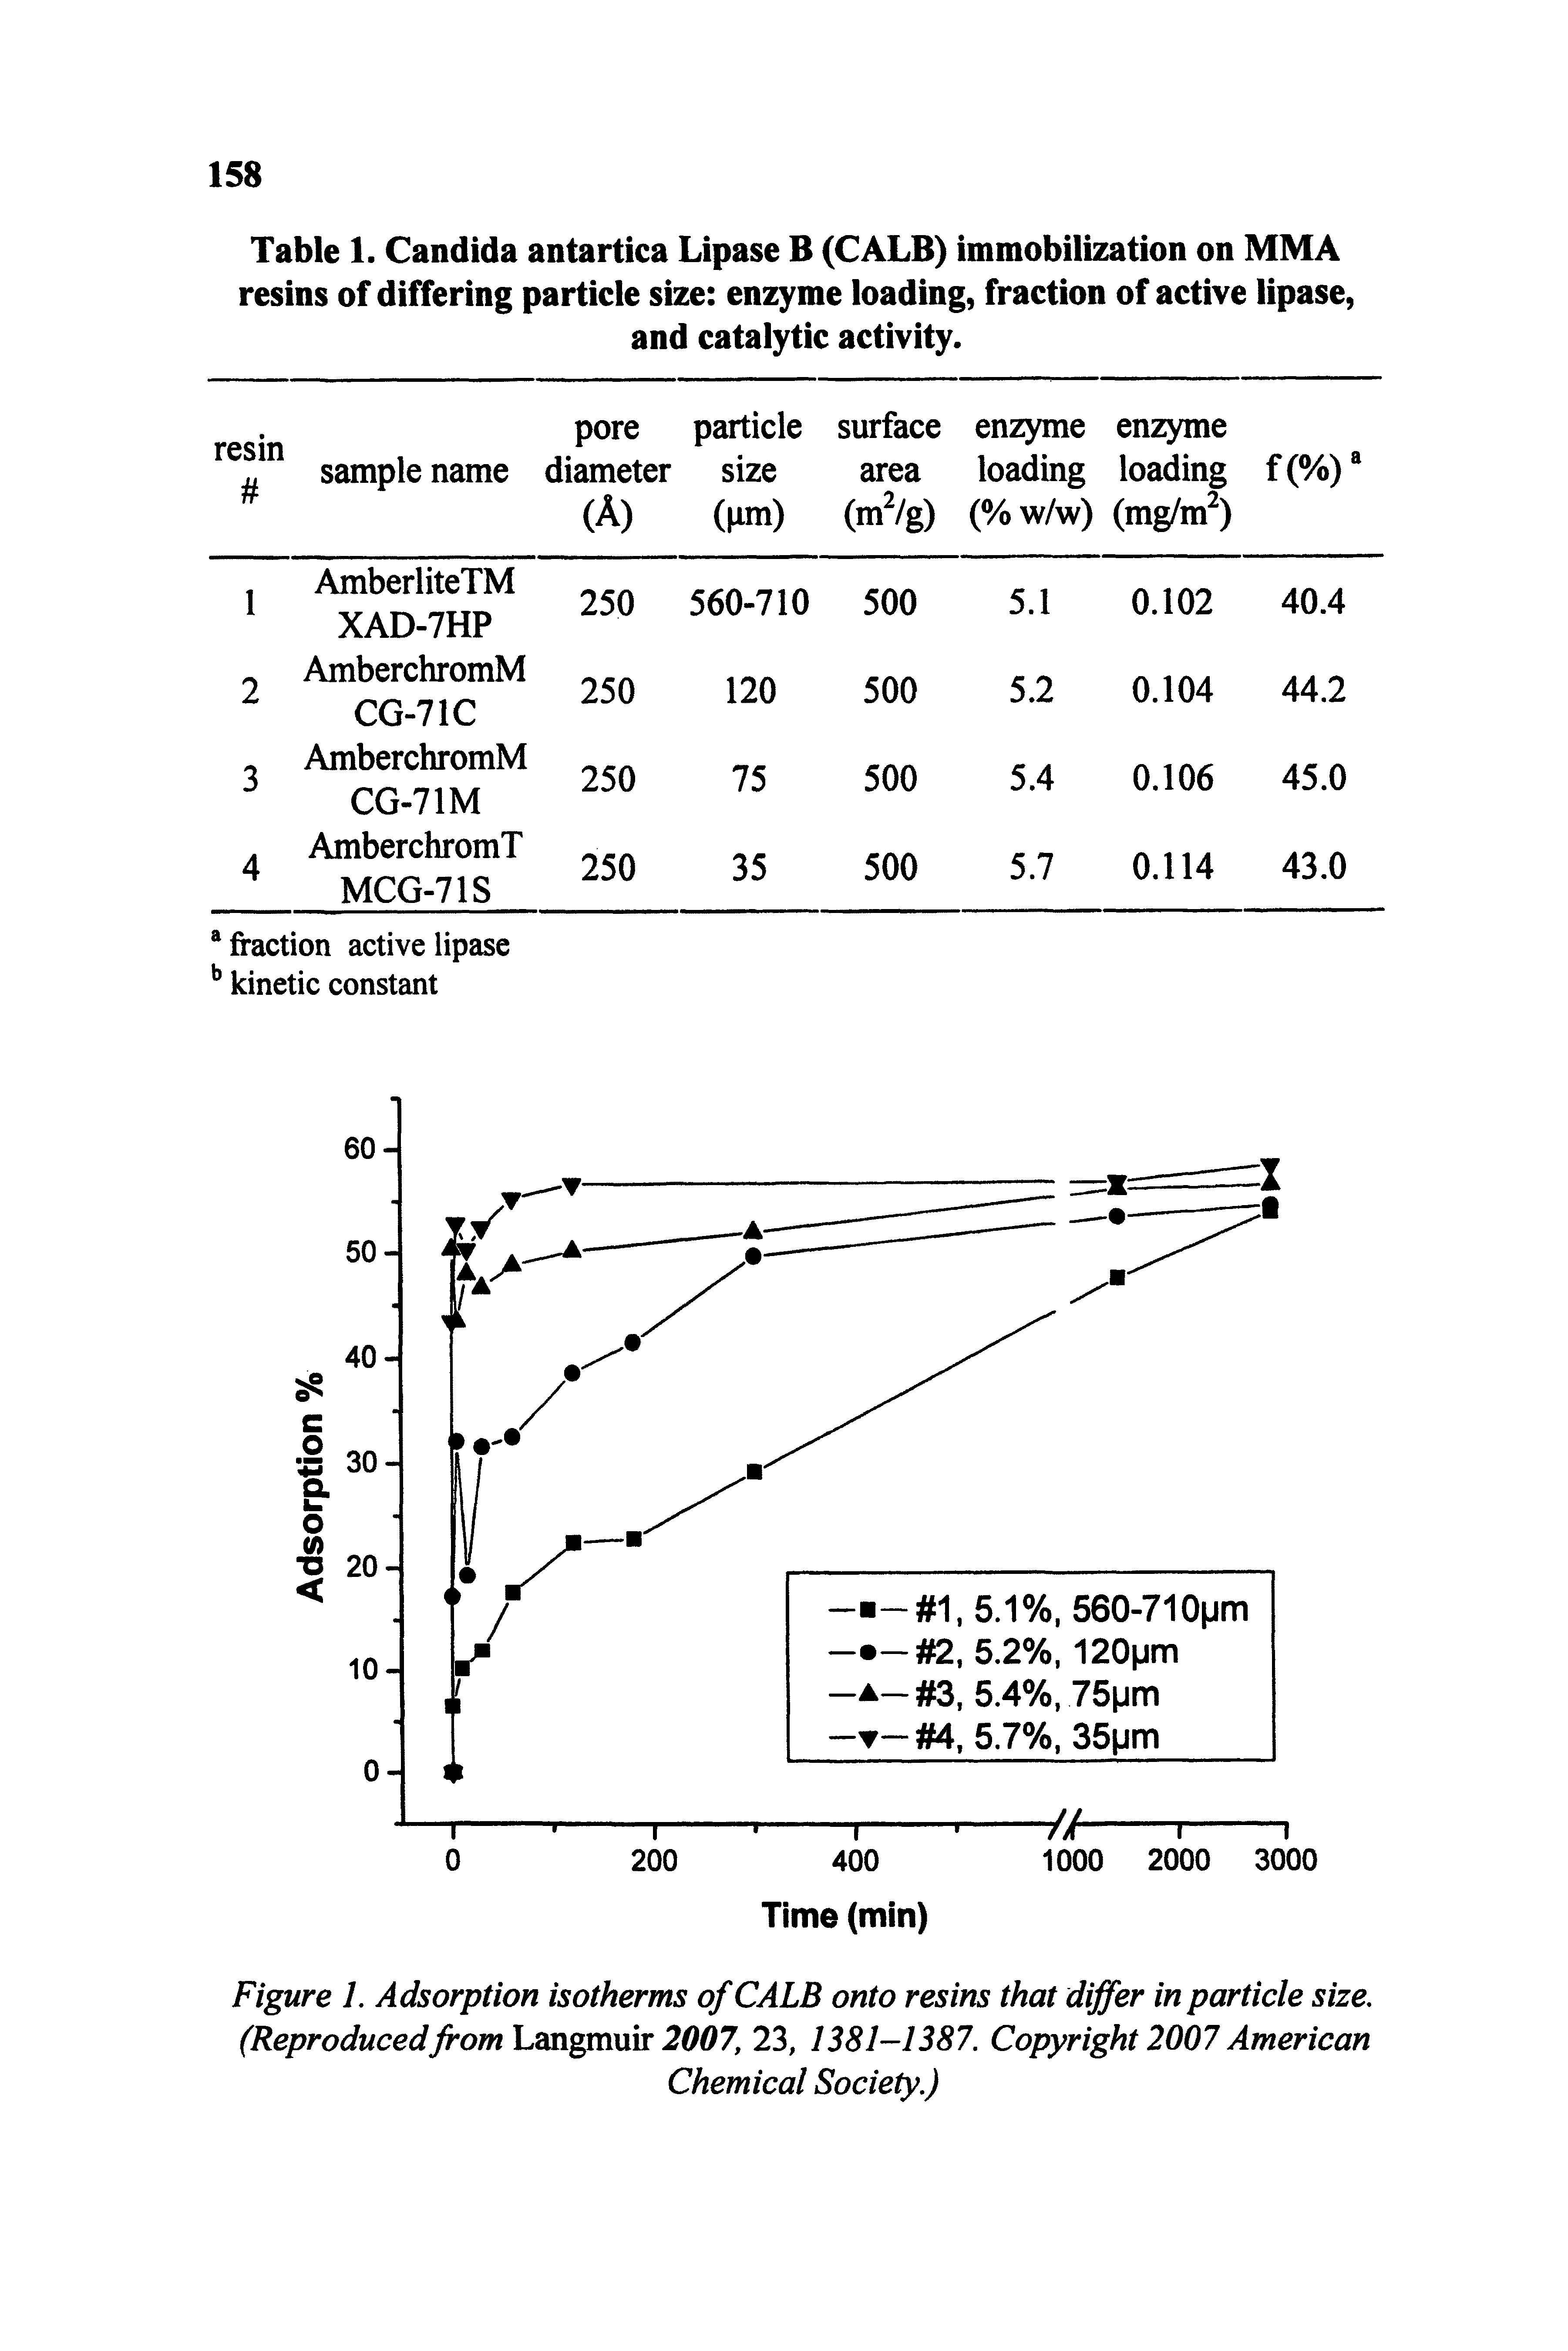 Figure 1. Adsorption isotherms of CALB onto resins that differ in particle size. (Reproducedfrom hmgmar 2007, 23, 1381-1387. Copyright 2007 American...